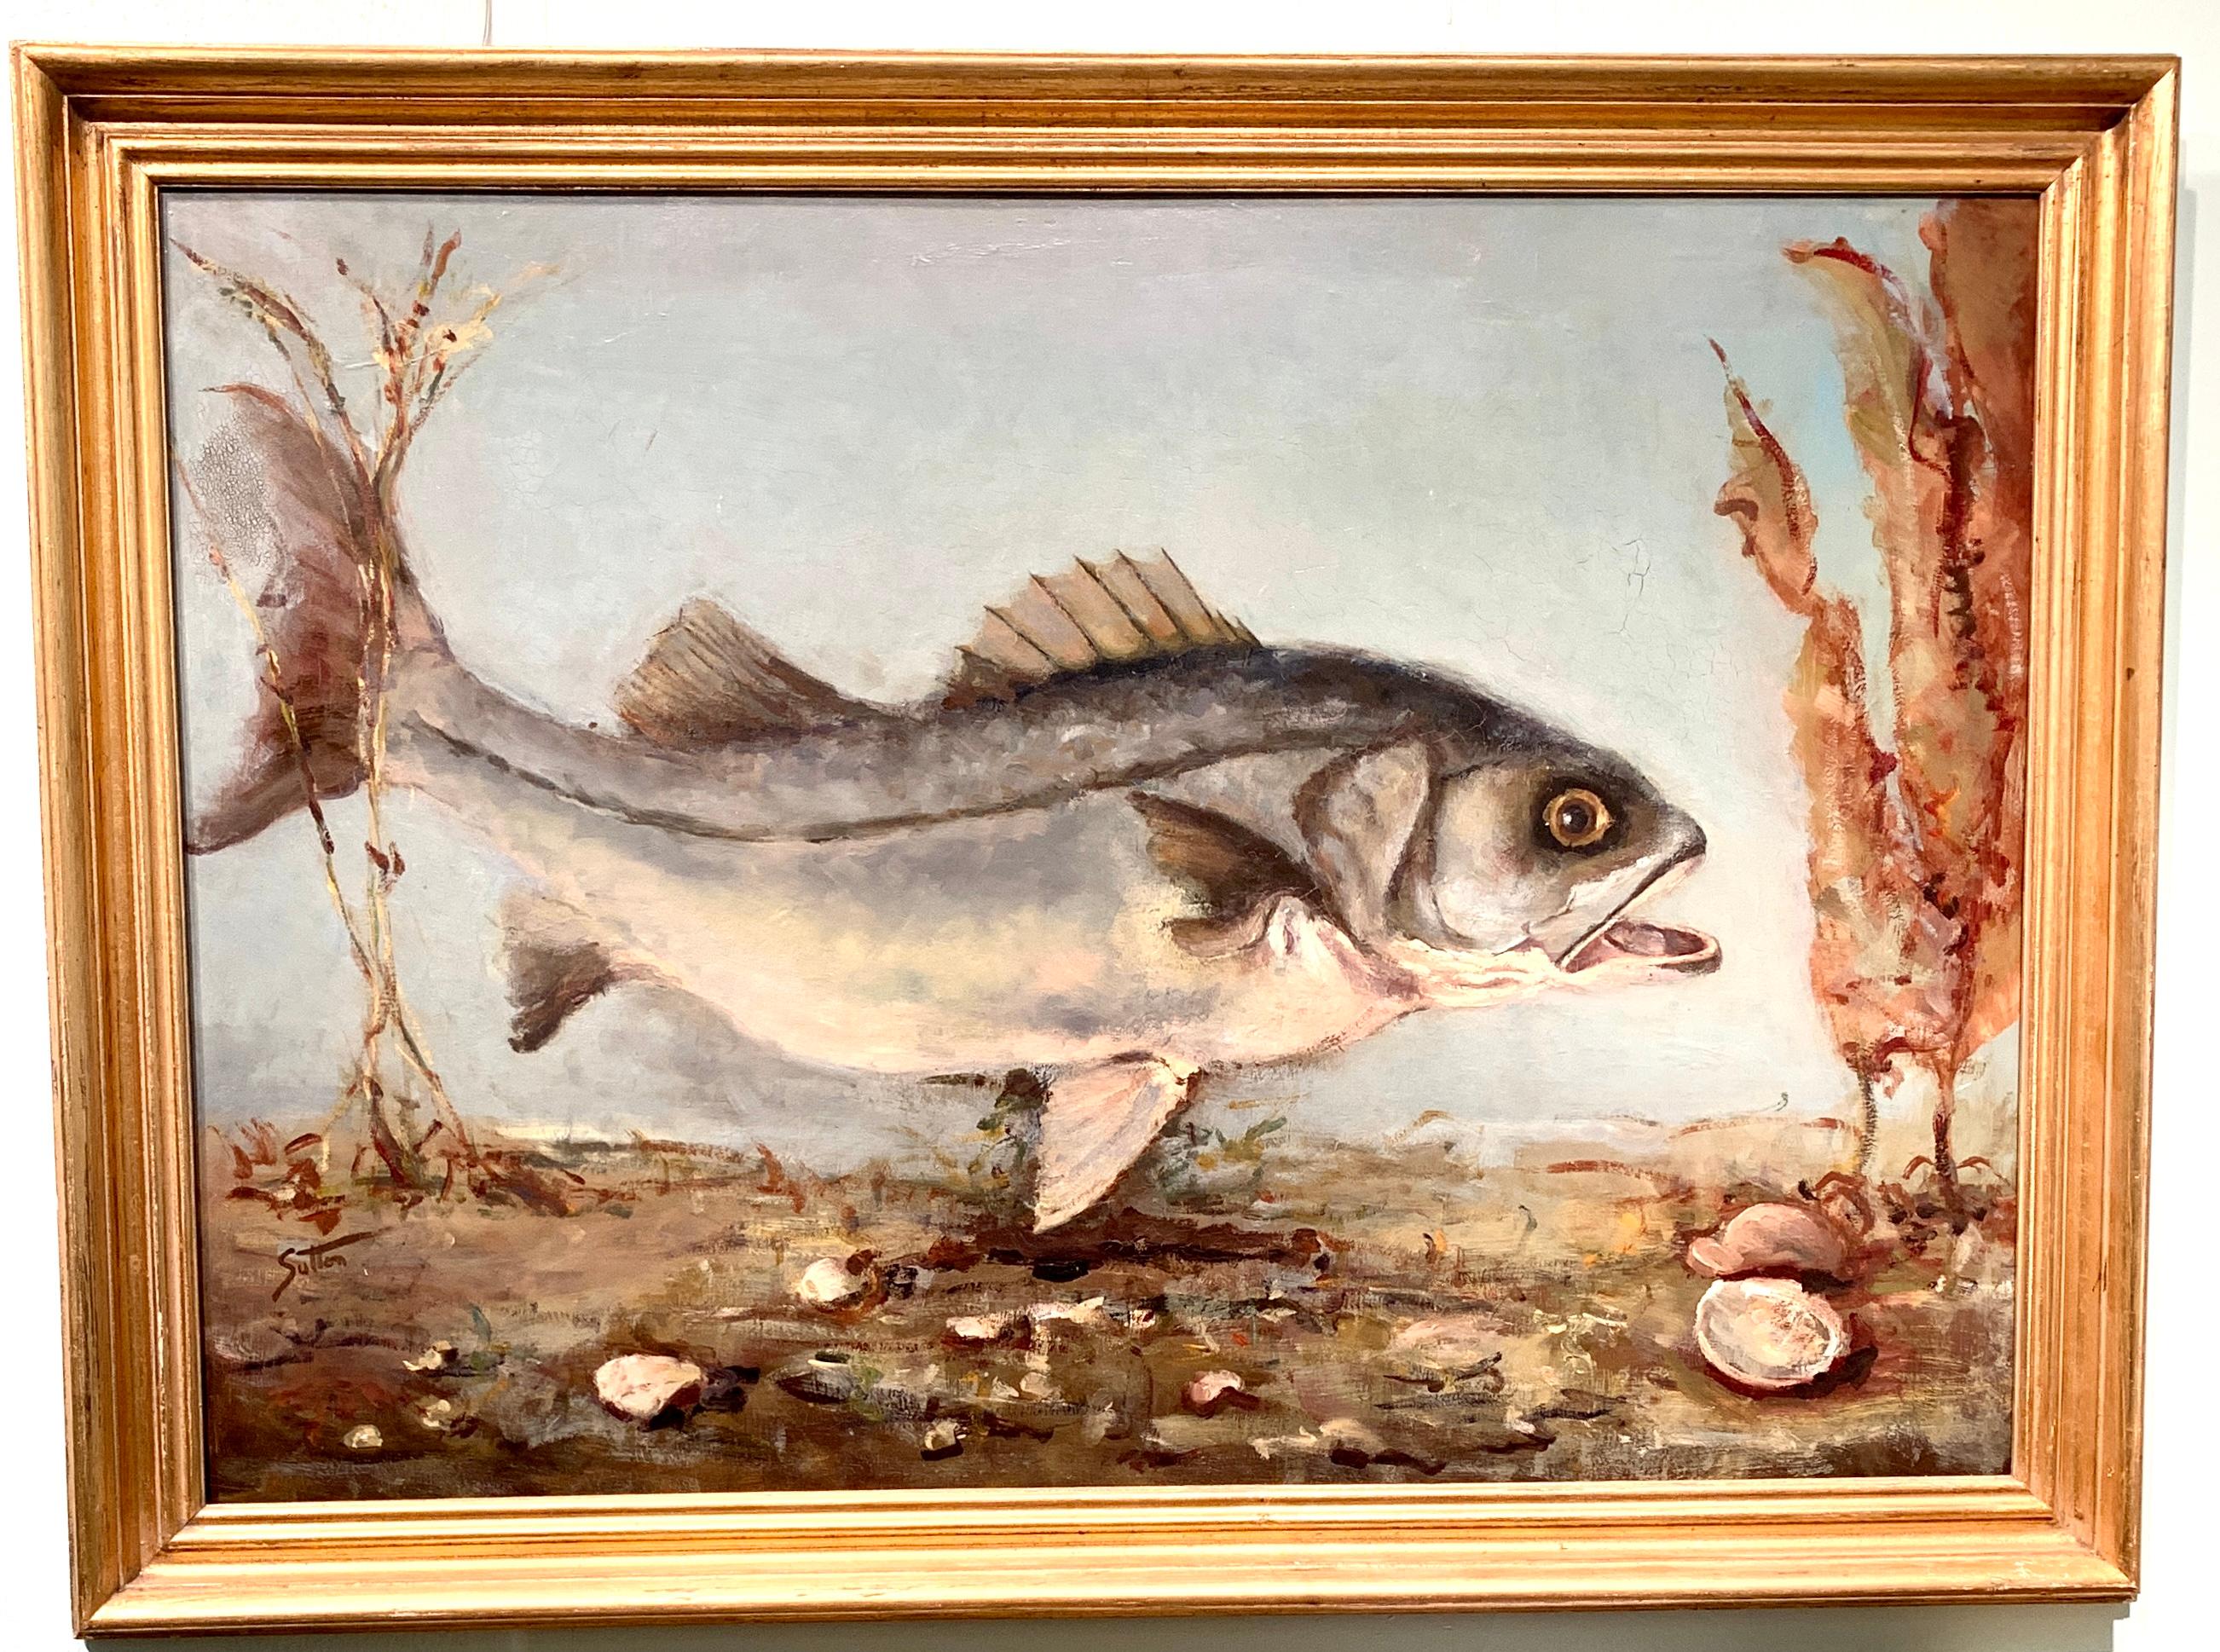 American Impressionist Portrait of a Fish swimming, possibly a carp or Bass